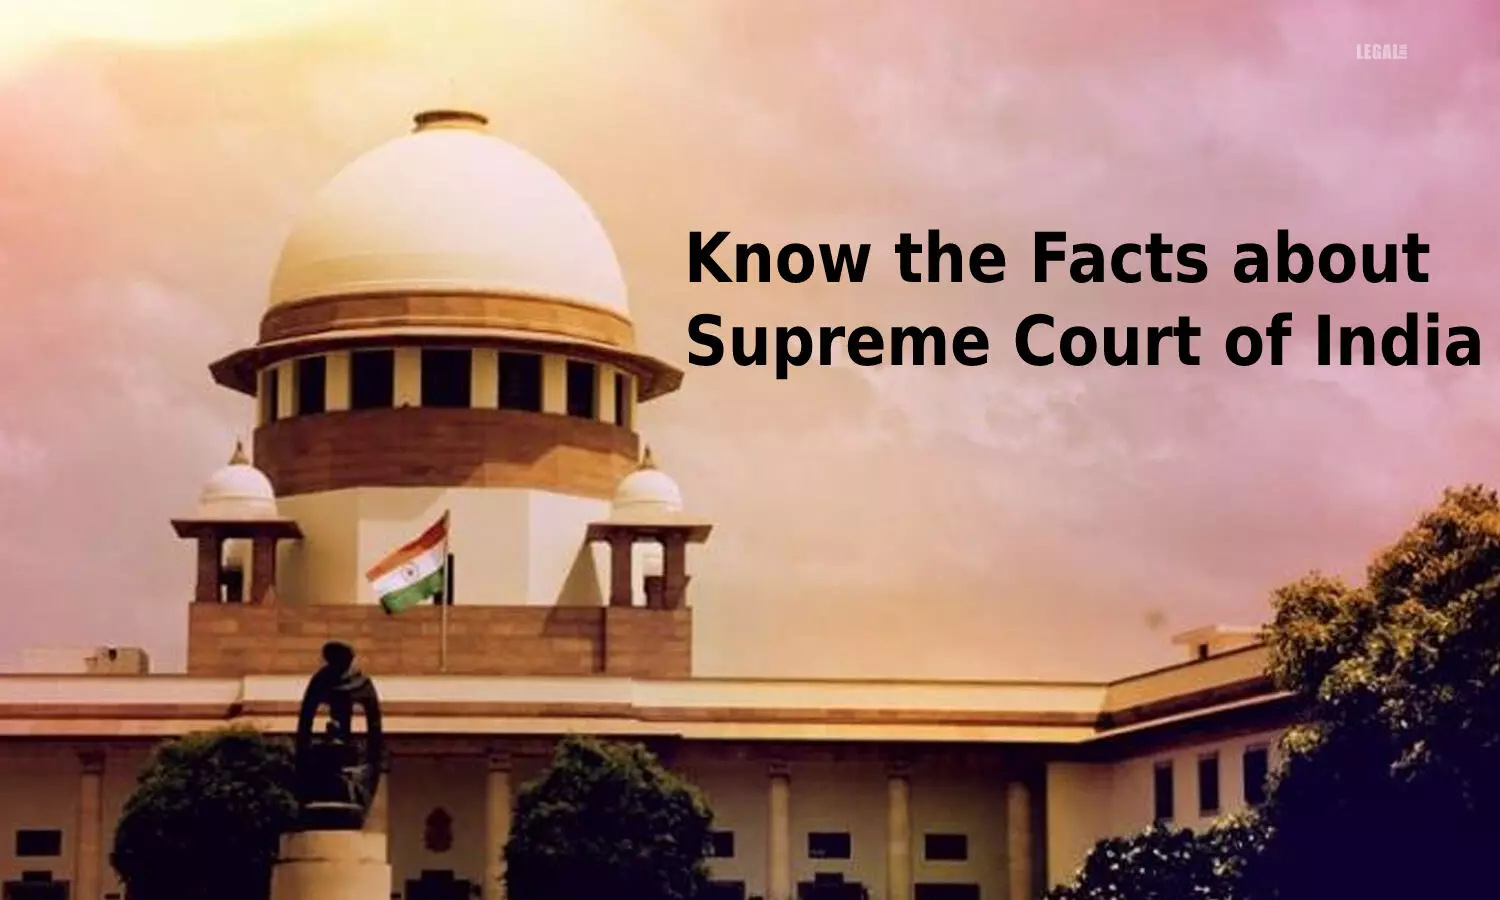 Know the Facts about Supreme Court of India